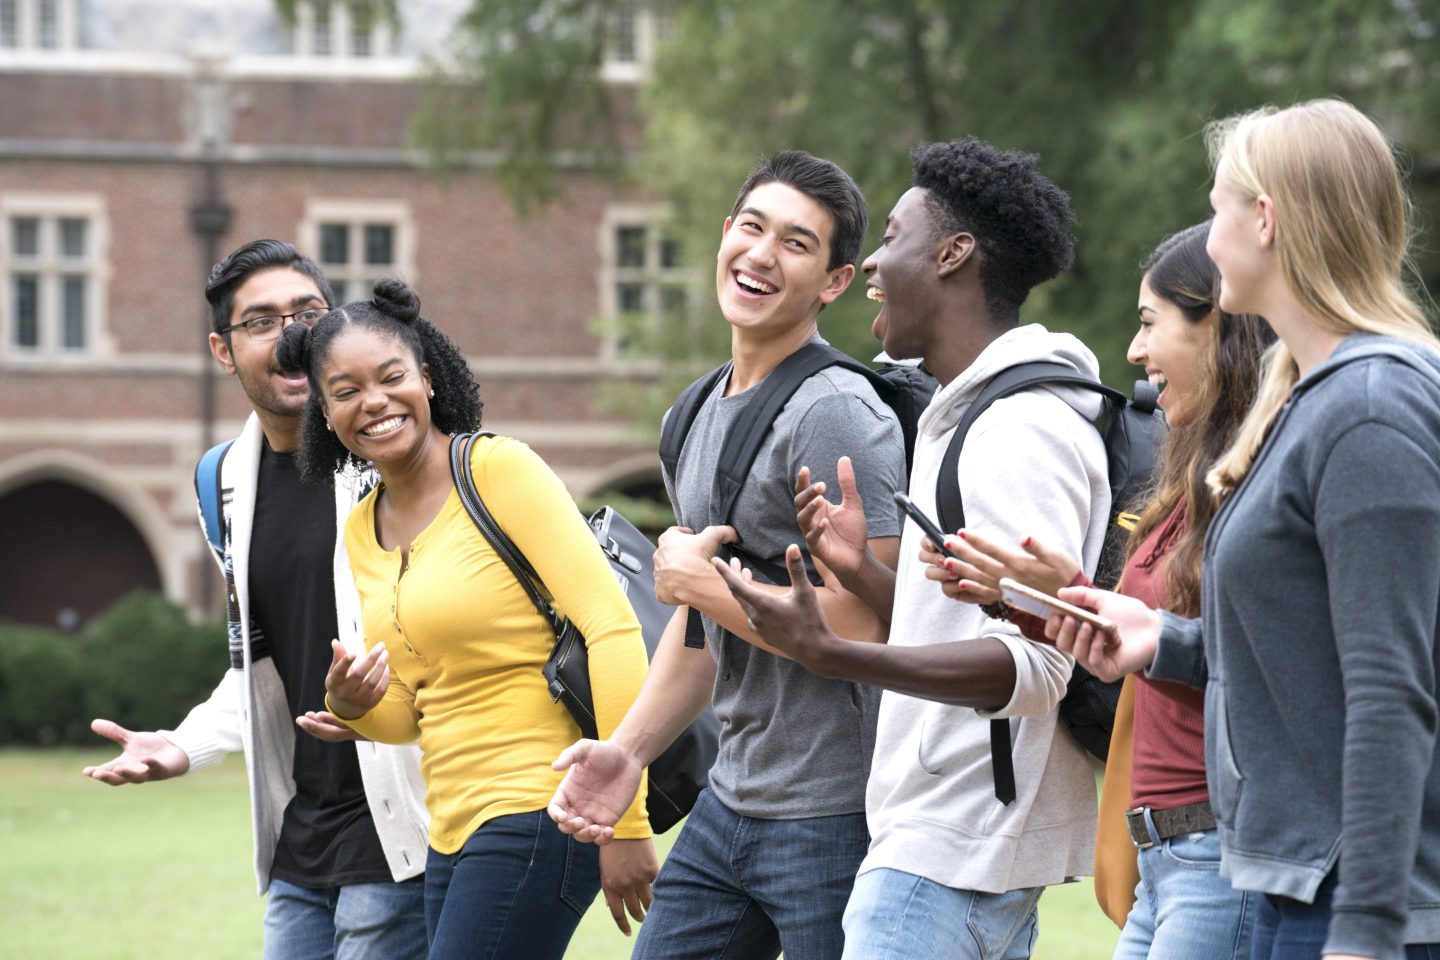 A group of college students laugh as they walk through campus.